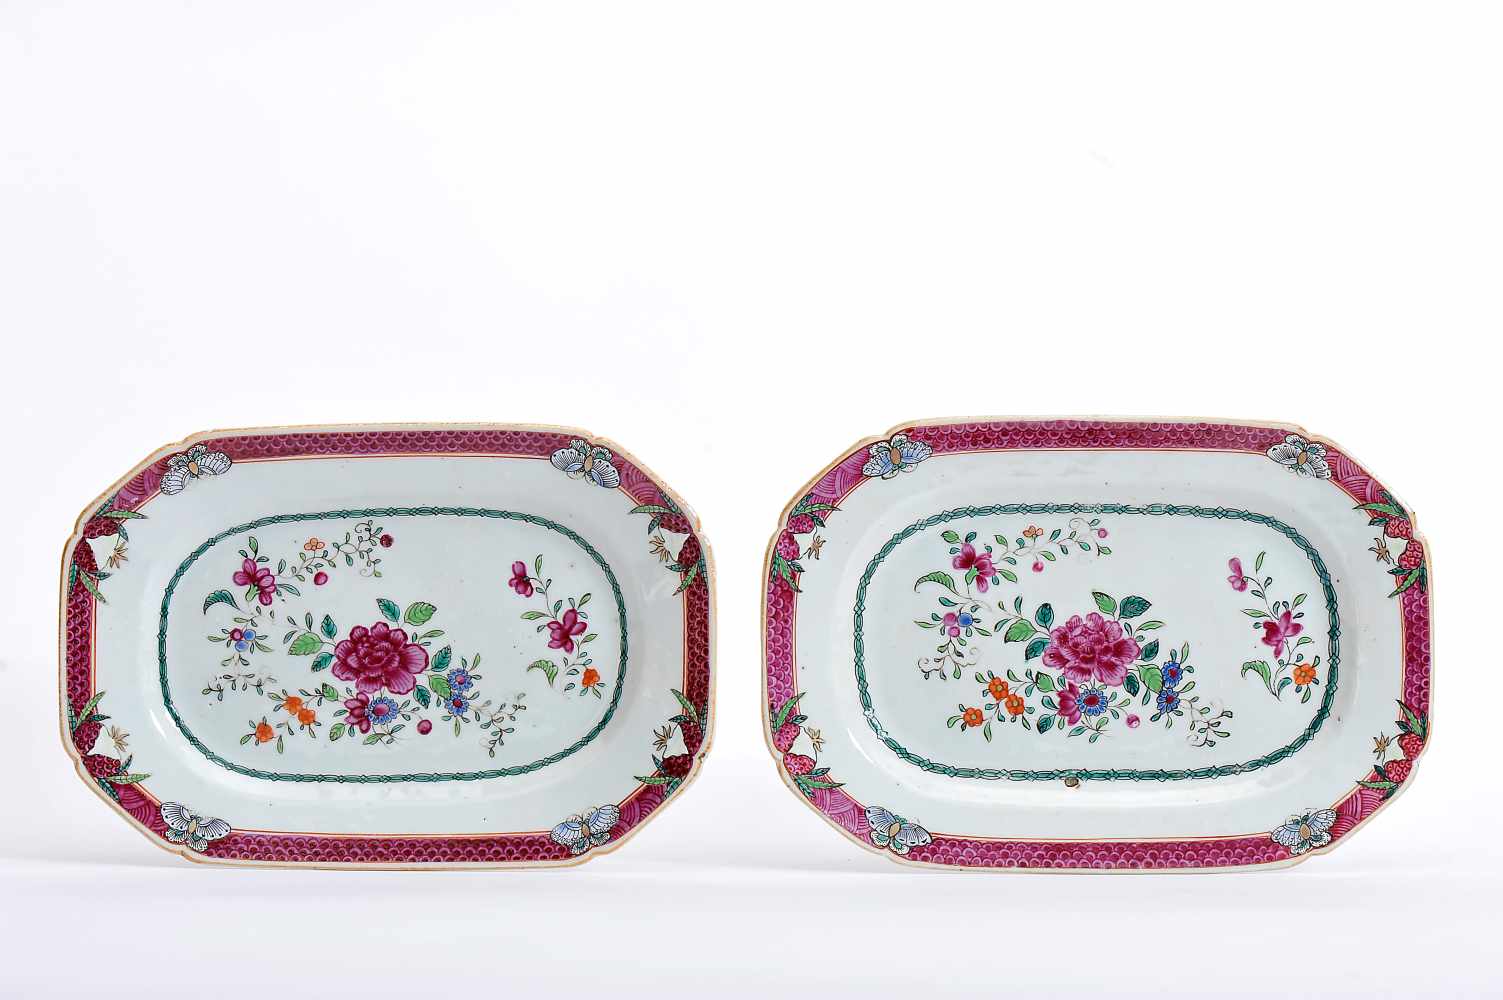 A Pair of Scalloped Stands, chinese export porcelain, gilt and polychrome decoration "Flowers",